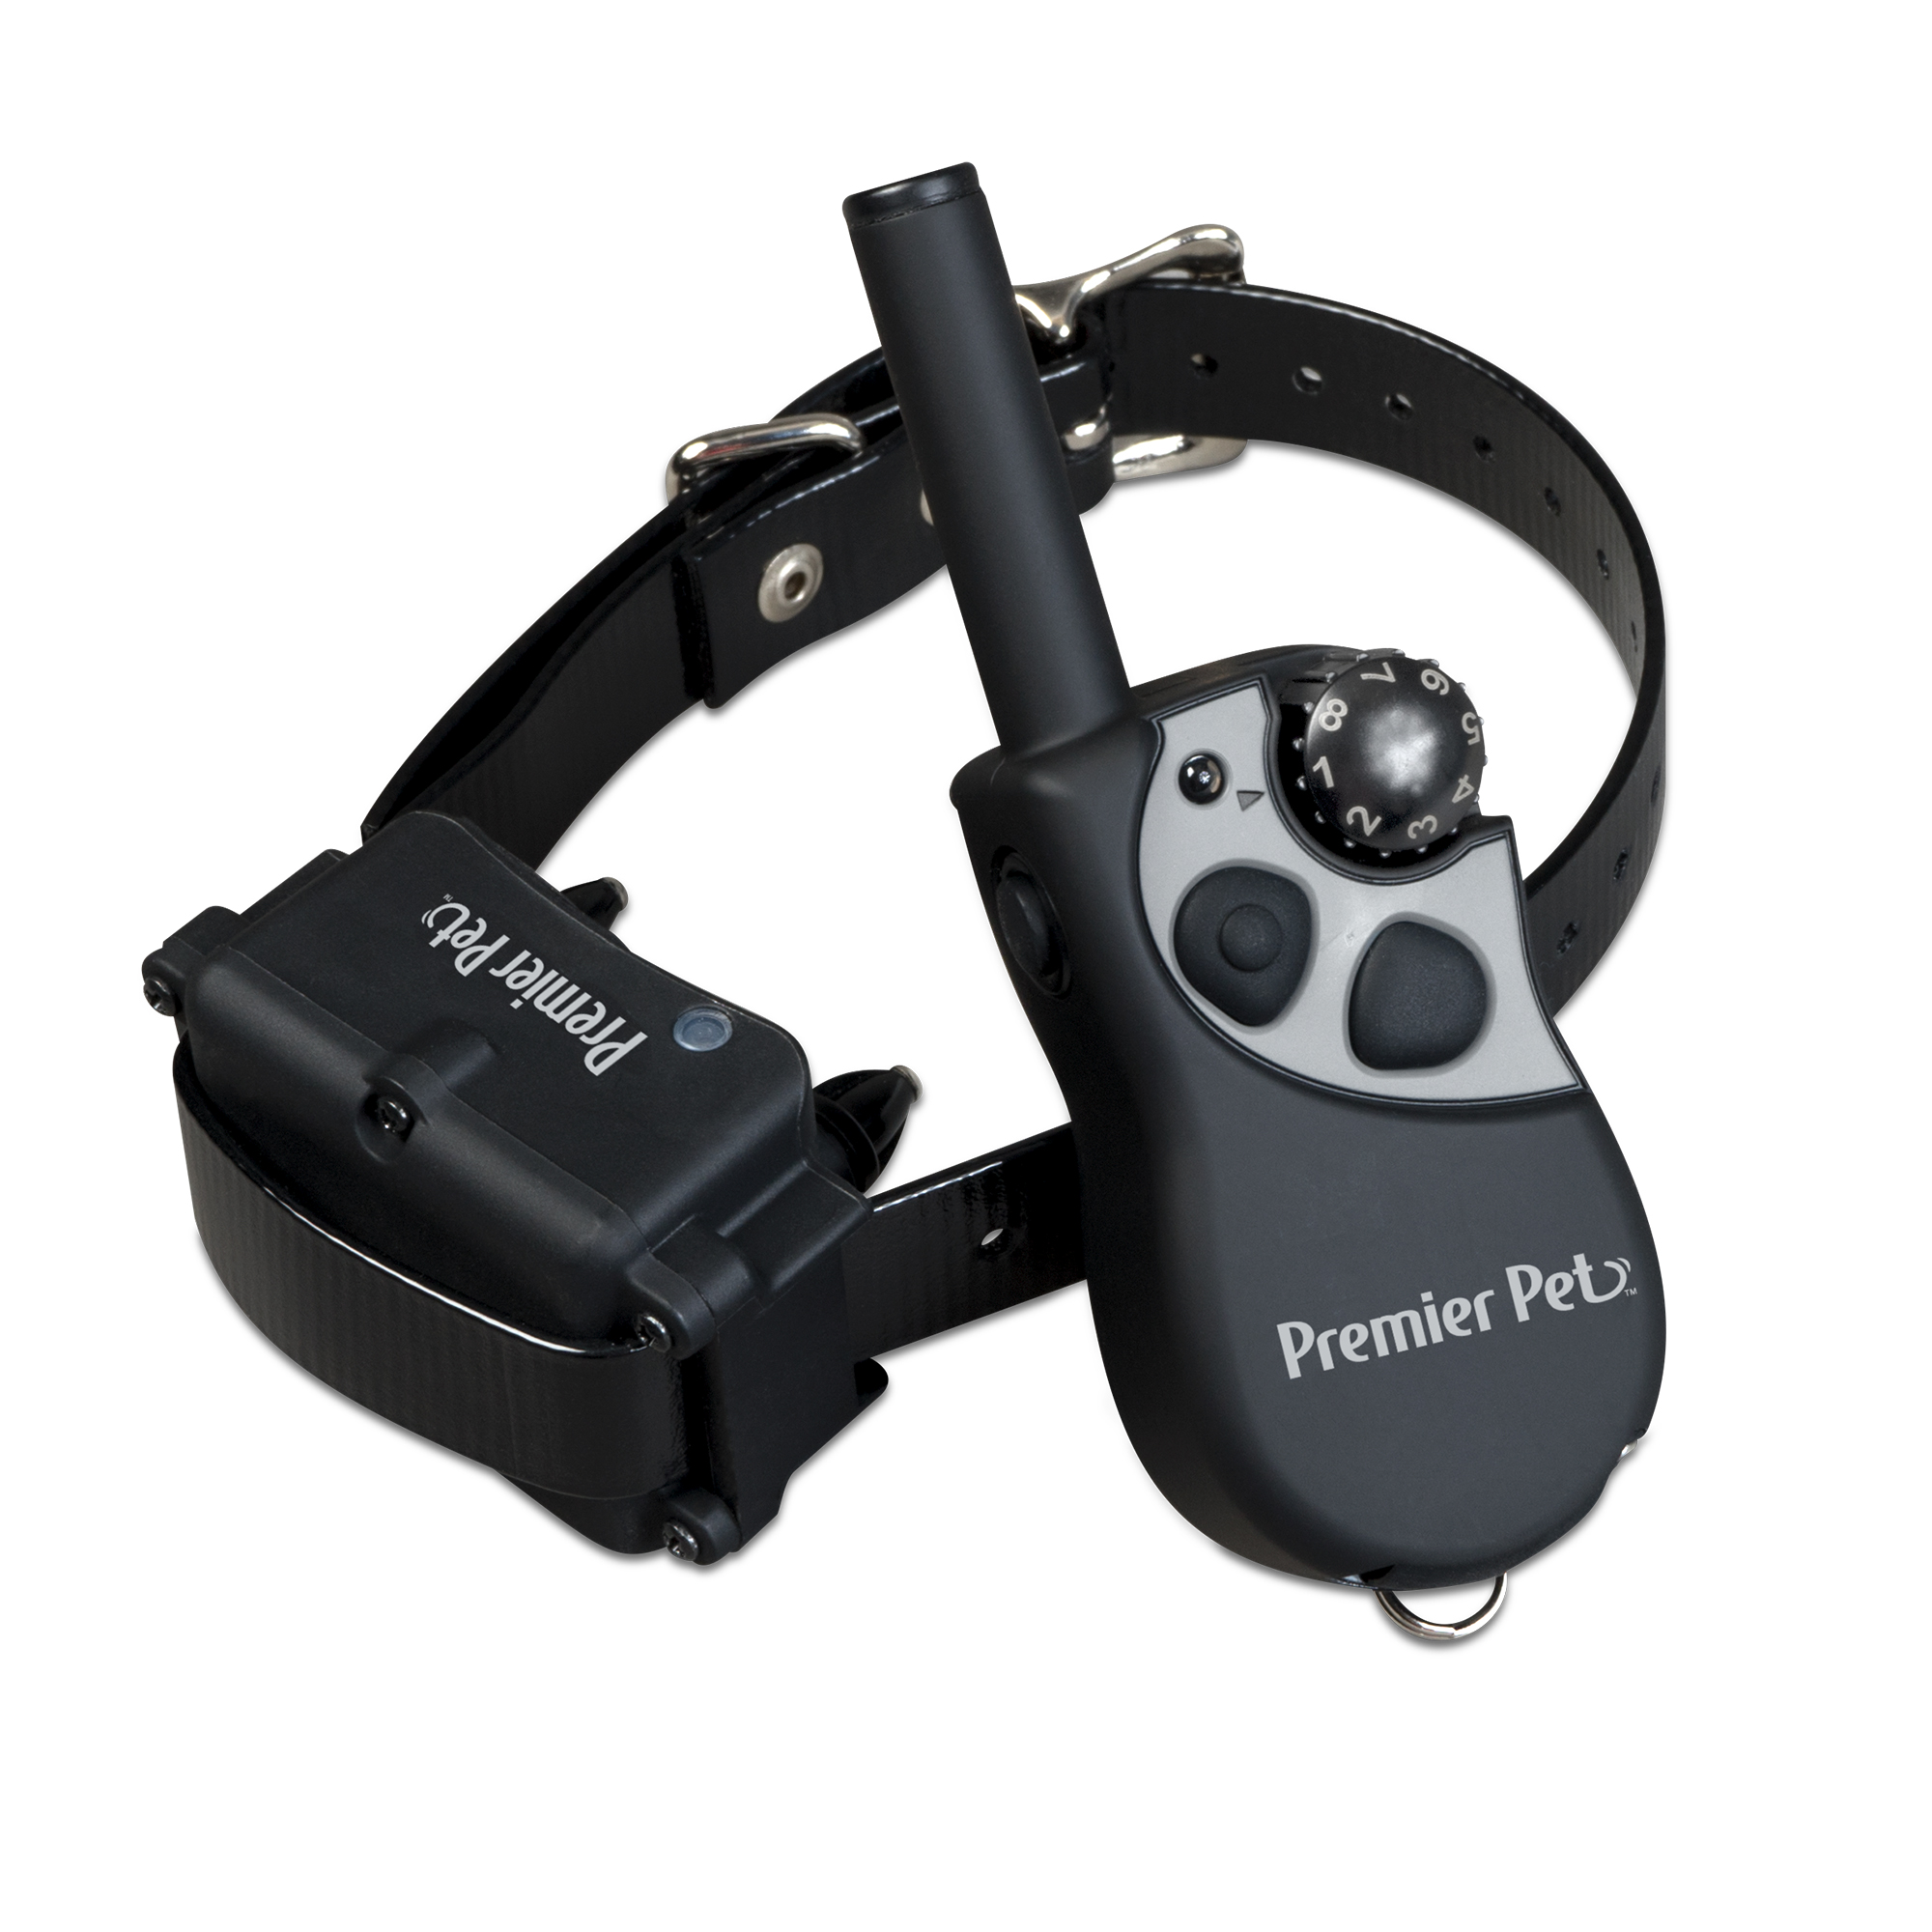 Premier Pet 400 Yard Remote Trainer with Tone/Beep and 8 Levels of Static - Rechargeable - image 1 of 5